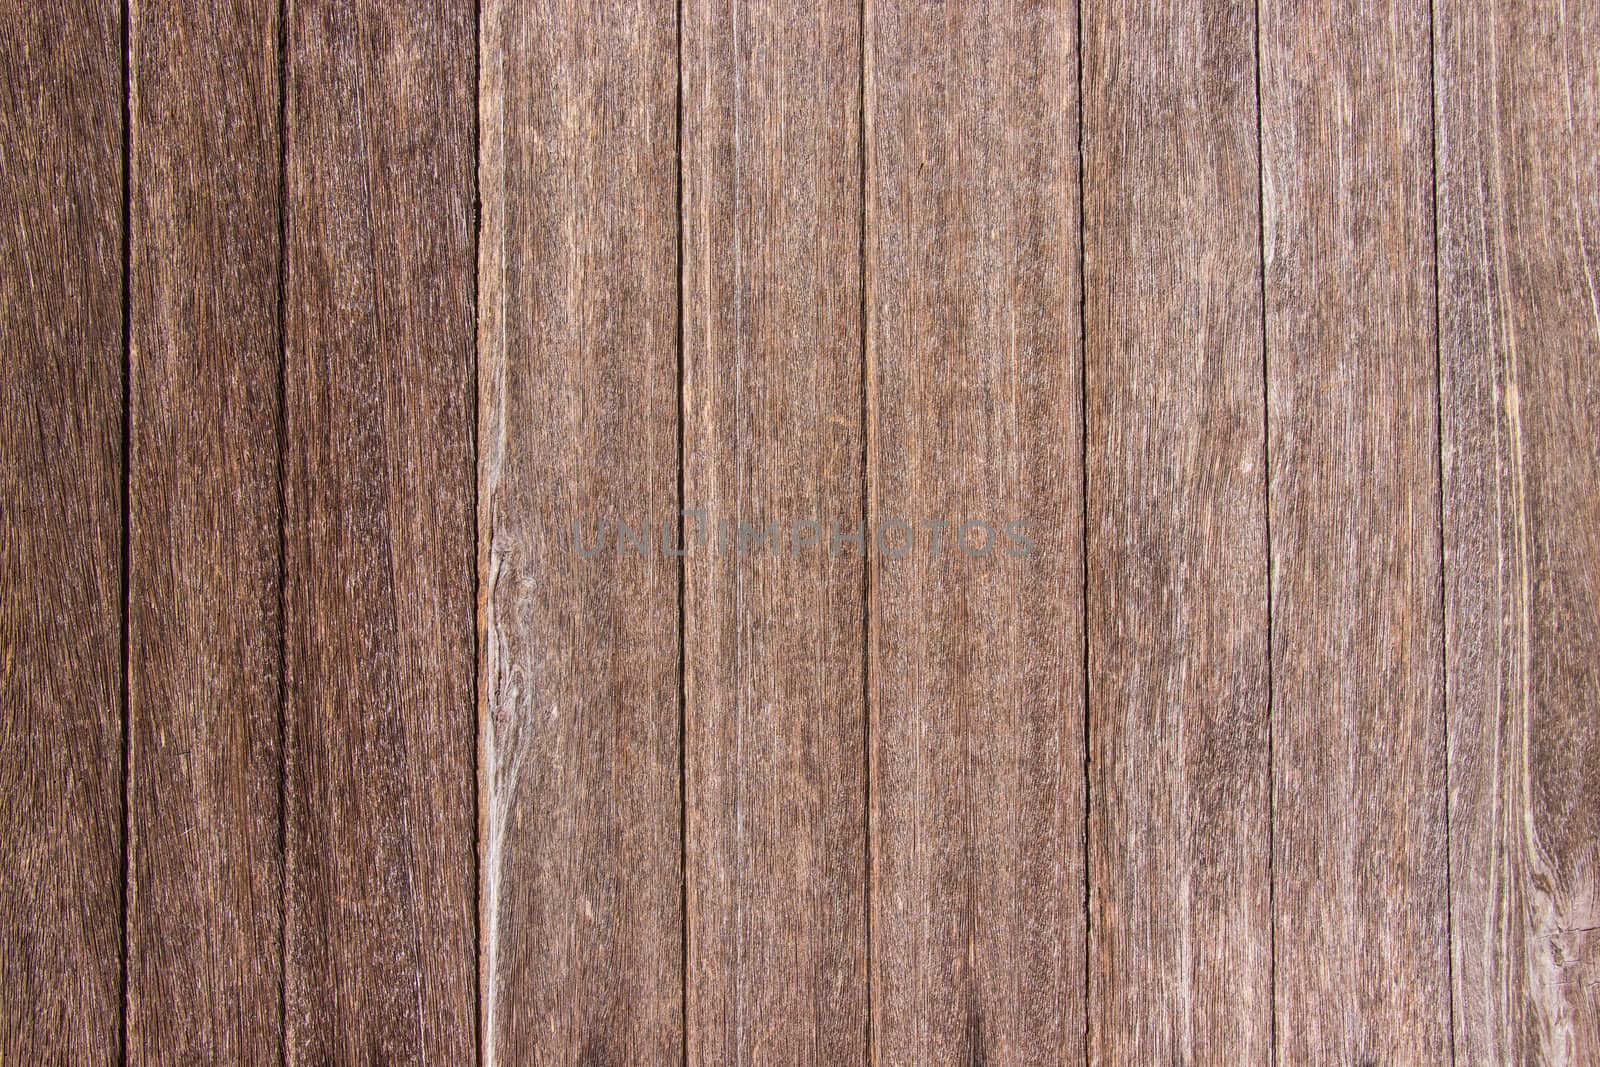 The surface of the brown natural wooden texture. Wood and wall background.